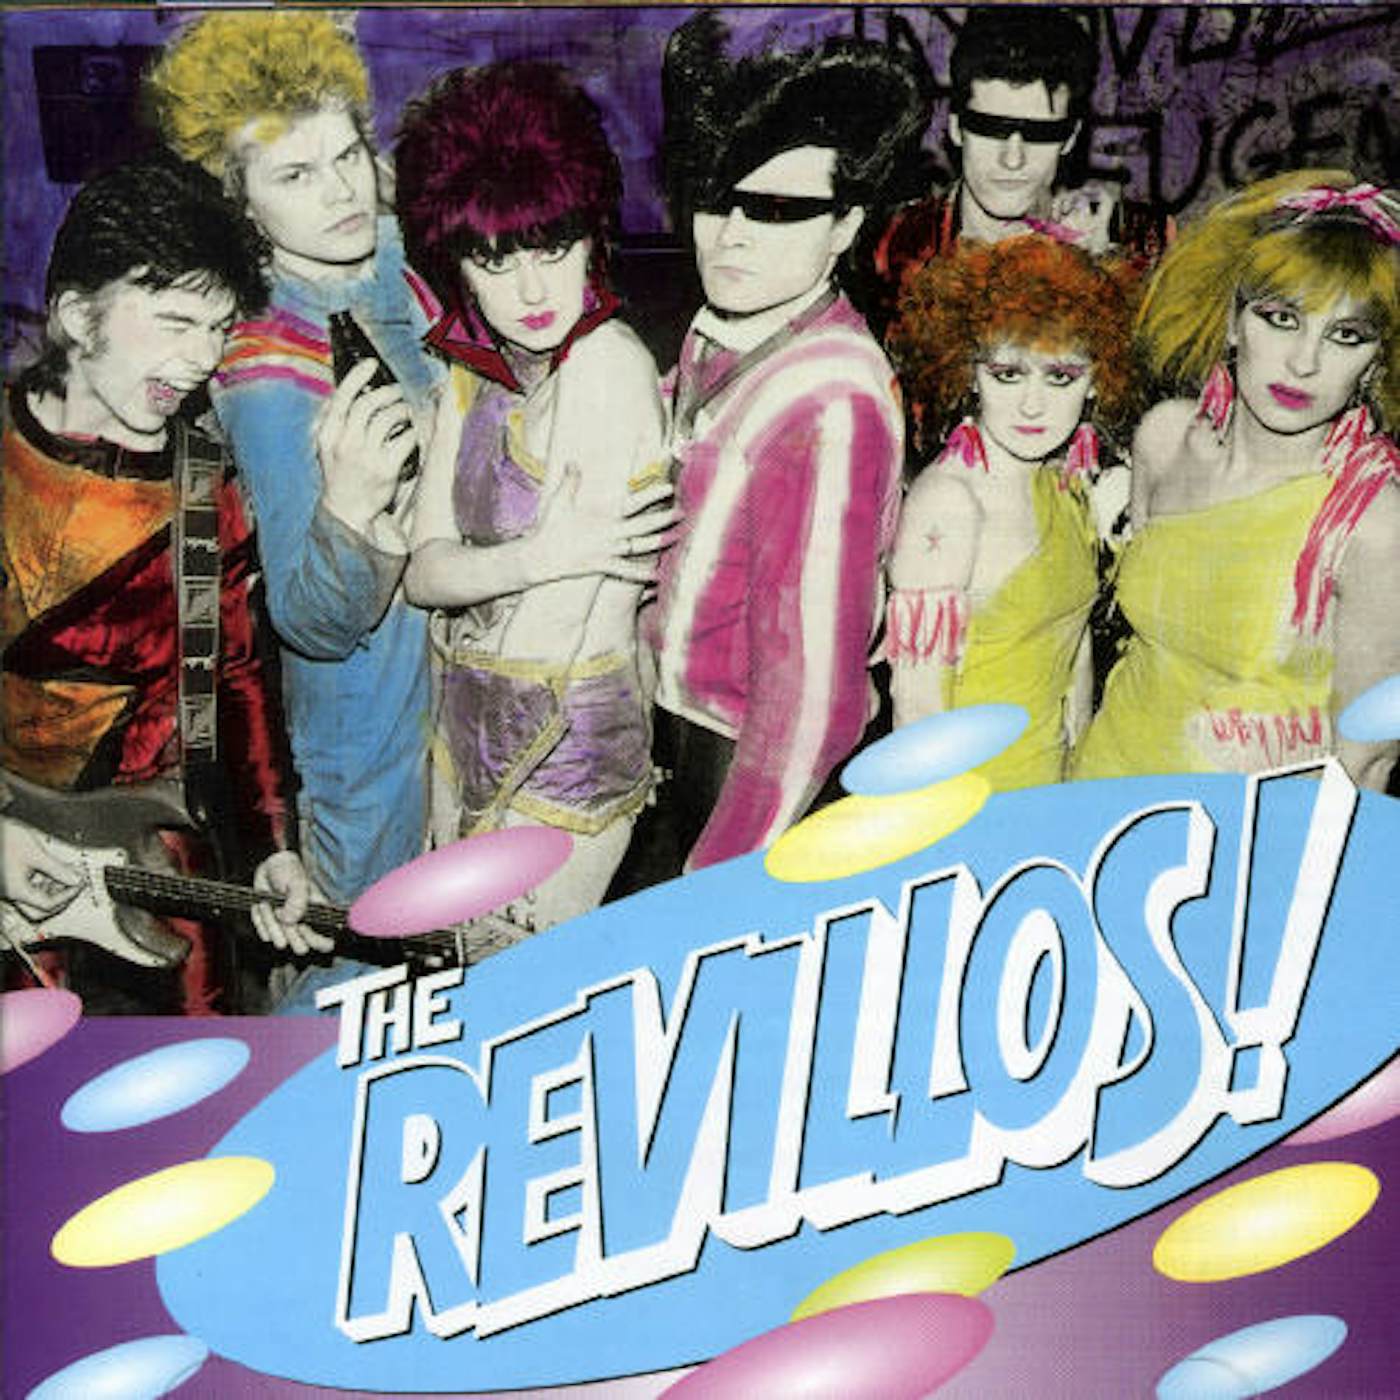 The Revillos FROM THE FREEZER CD